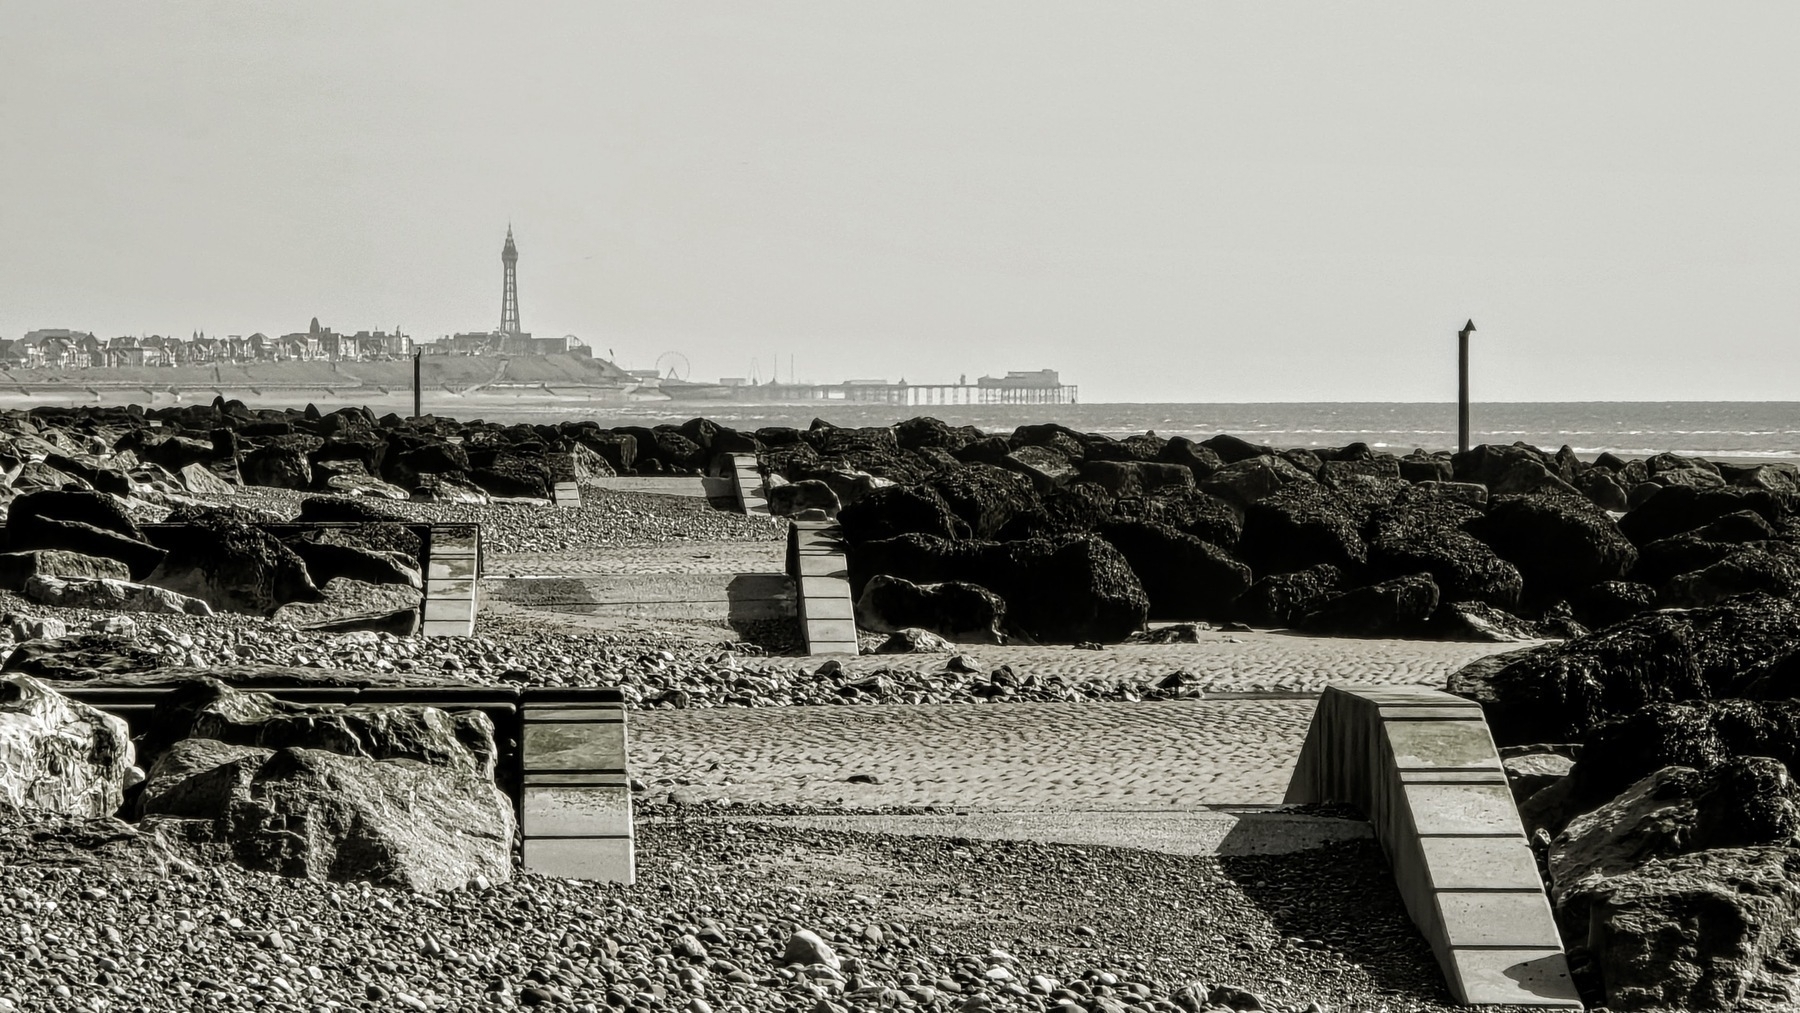 b/w image of Blackpool tower and surrounding coast taken from the north